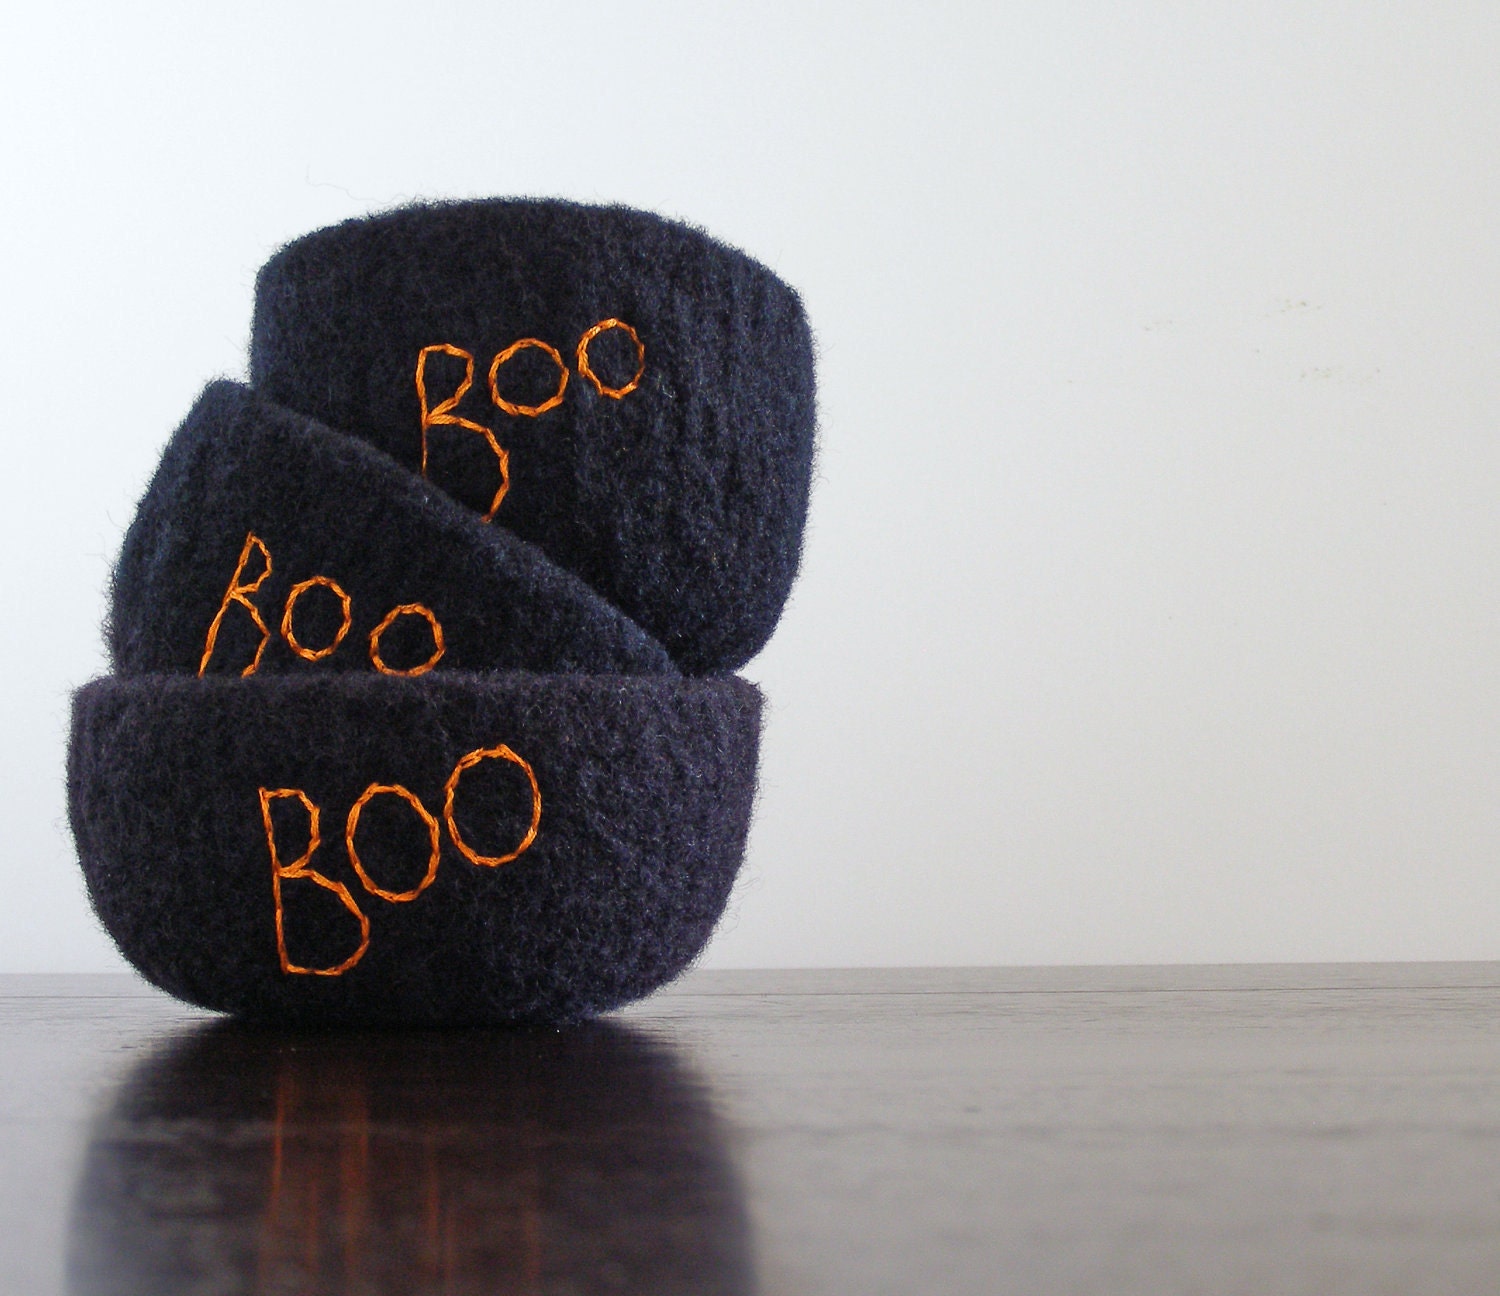 Halloween boo bowl - felted wool bowl in black with embroidered word "boo" in orange - decorate your office or home - candy bowl, container - theFelterie